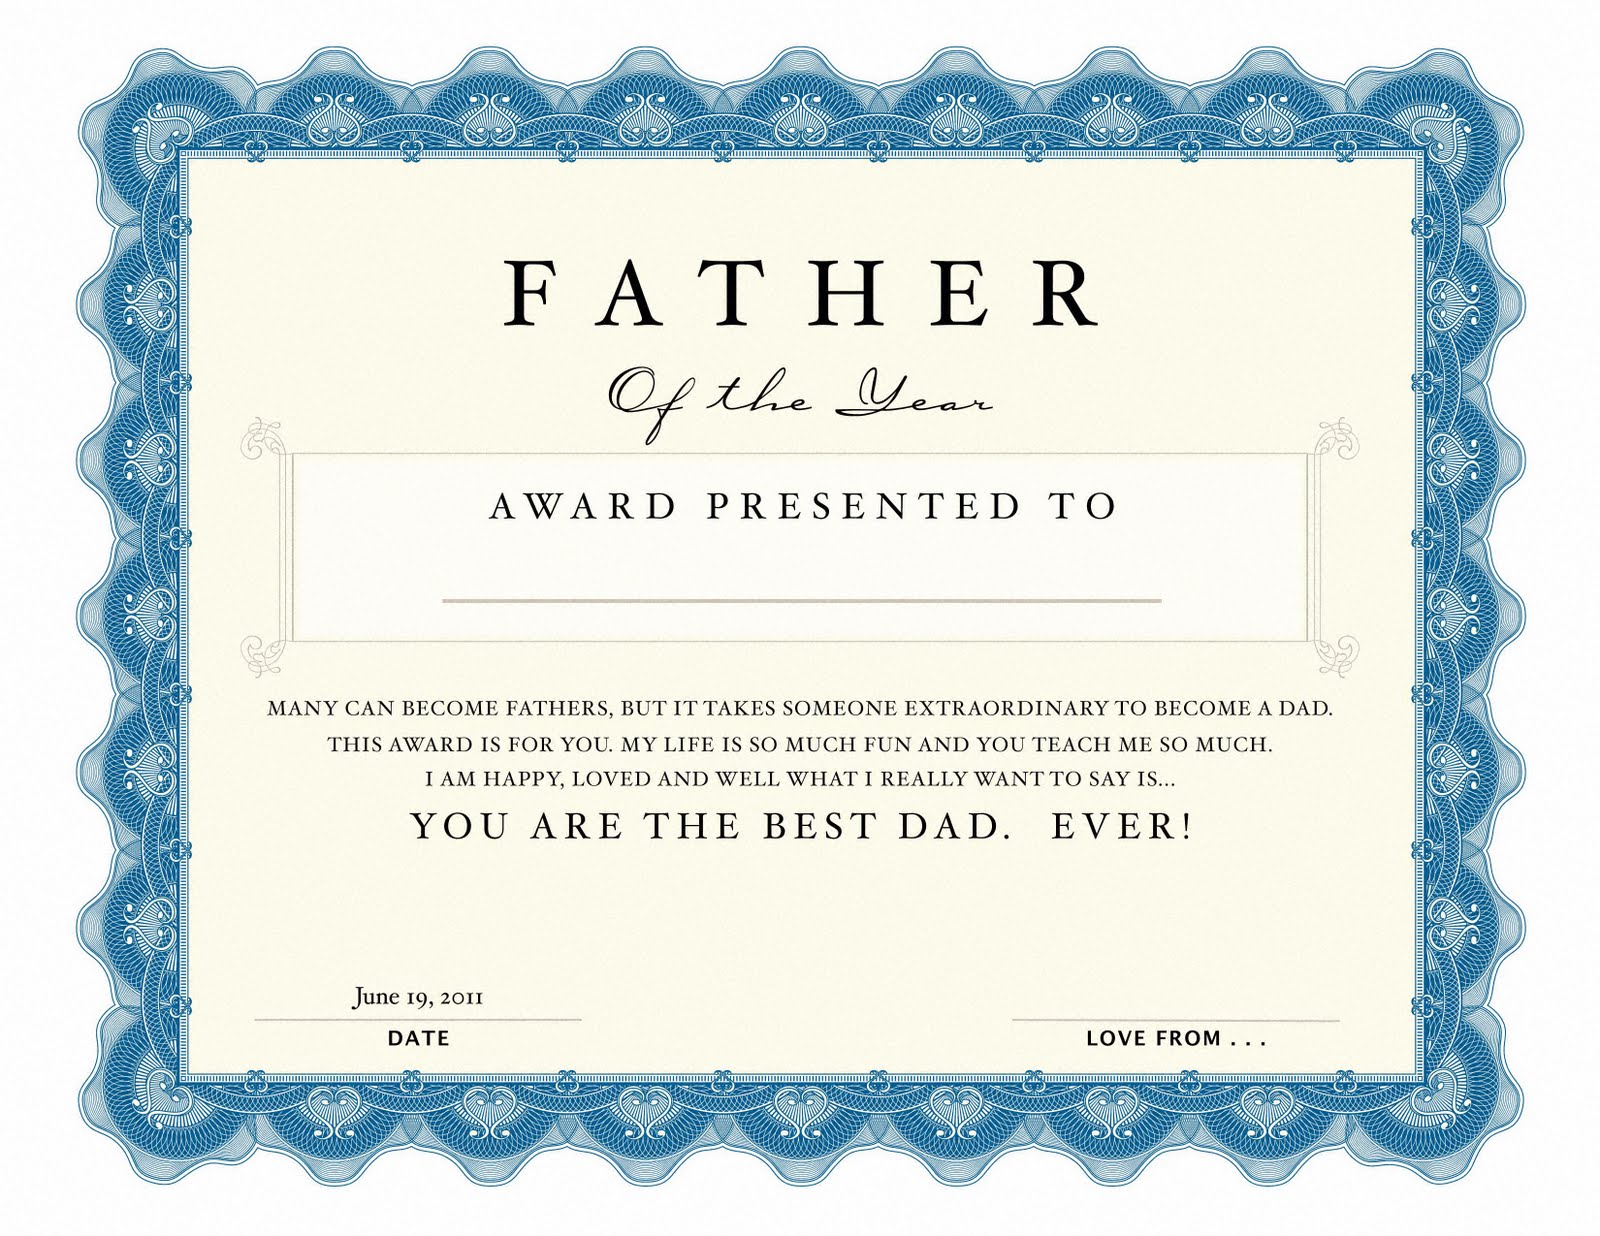 the-shower-diva-s-party-tips-inspiration-and-ideas-free-printable-father-s-day-award